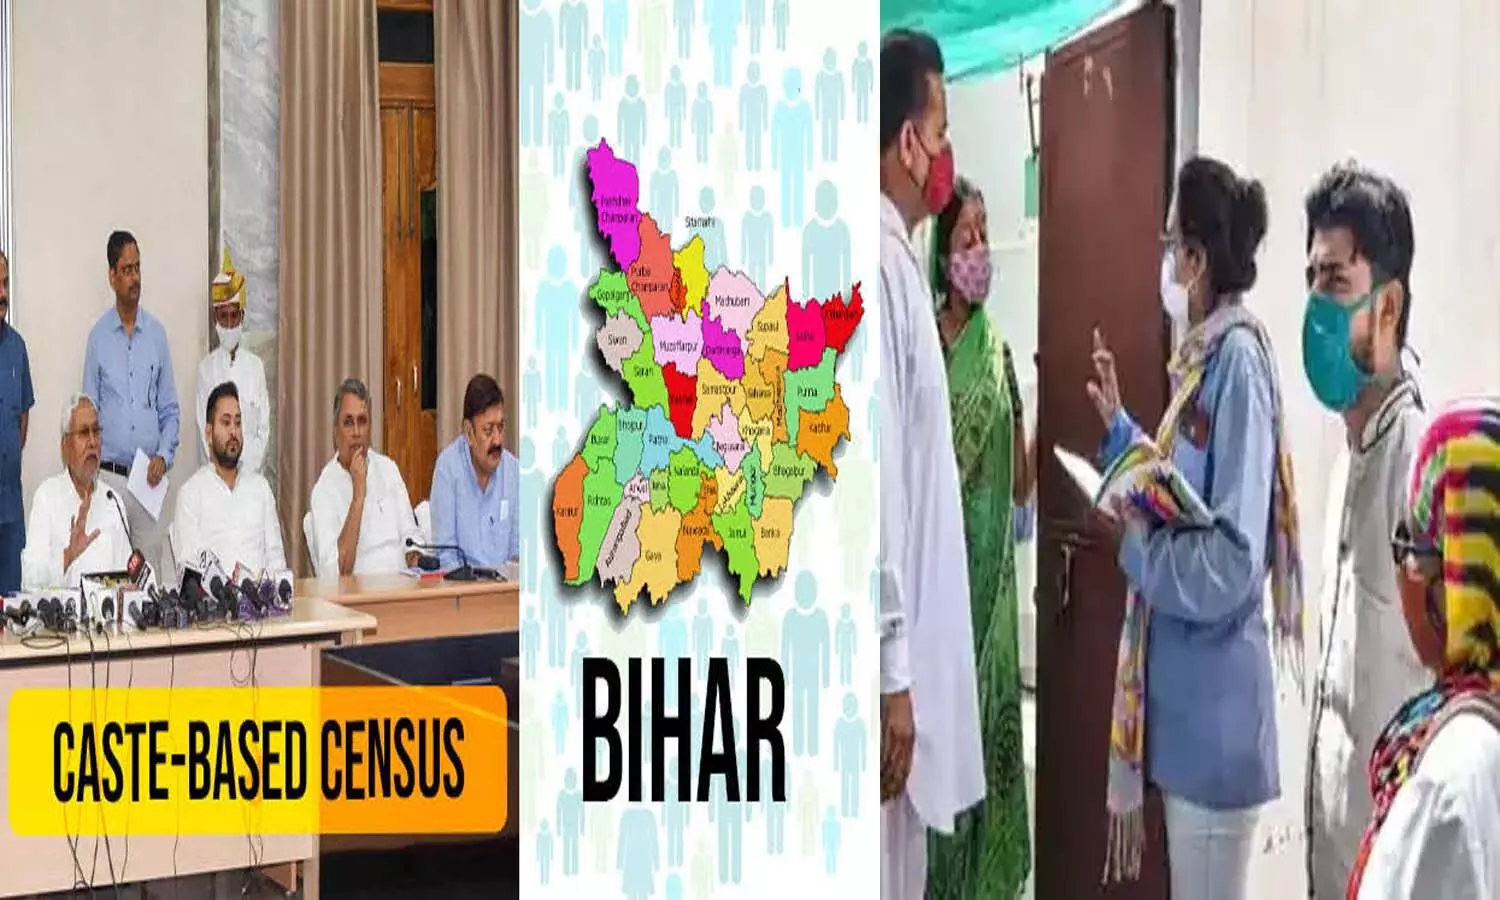 Caste census will be held in Bihar from January 7, the process will be completed in two phases